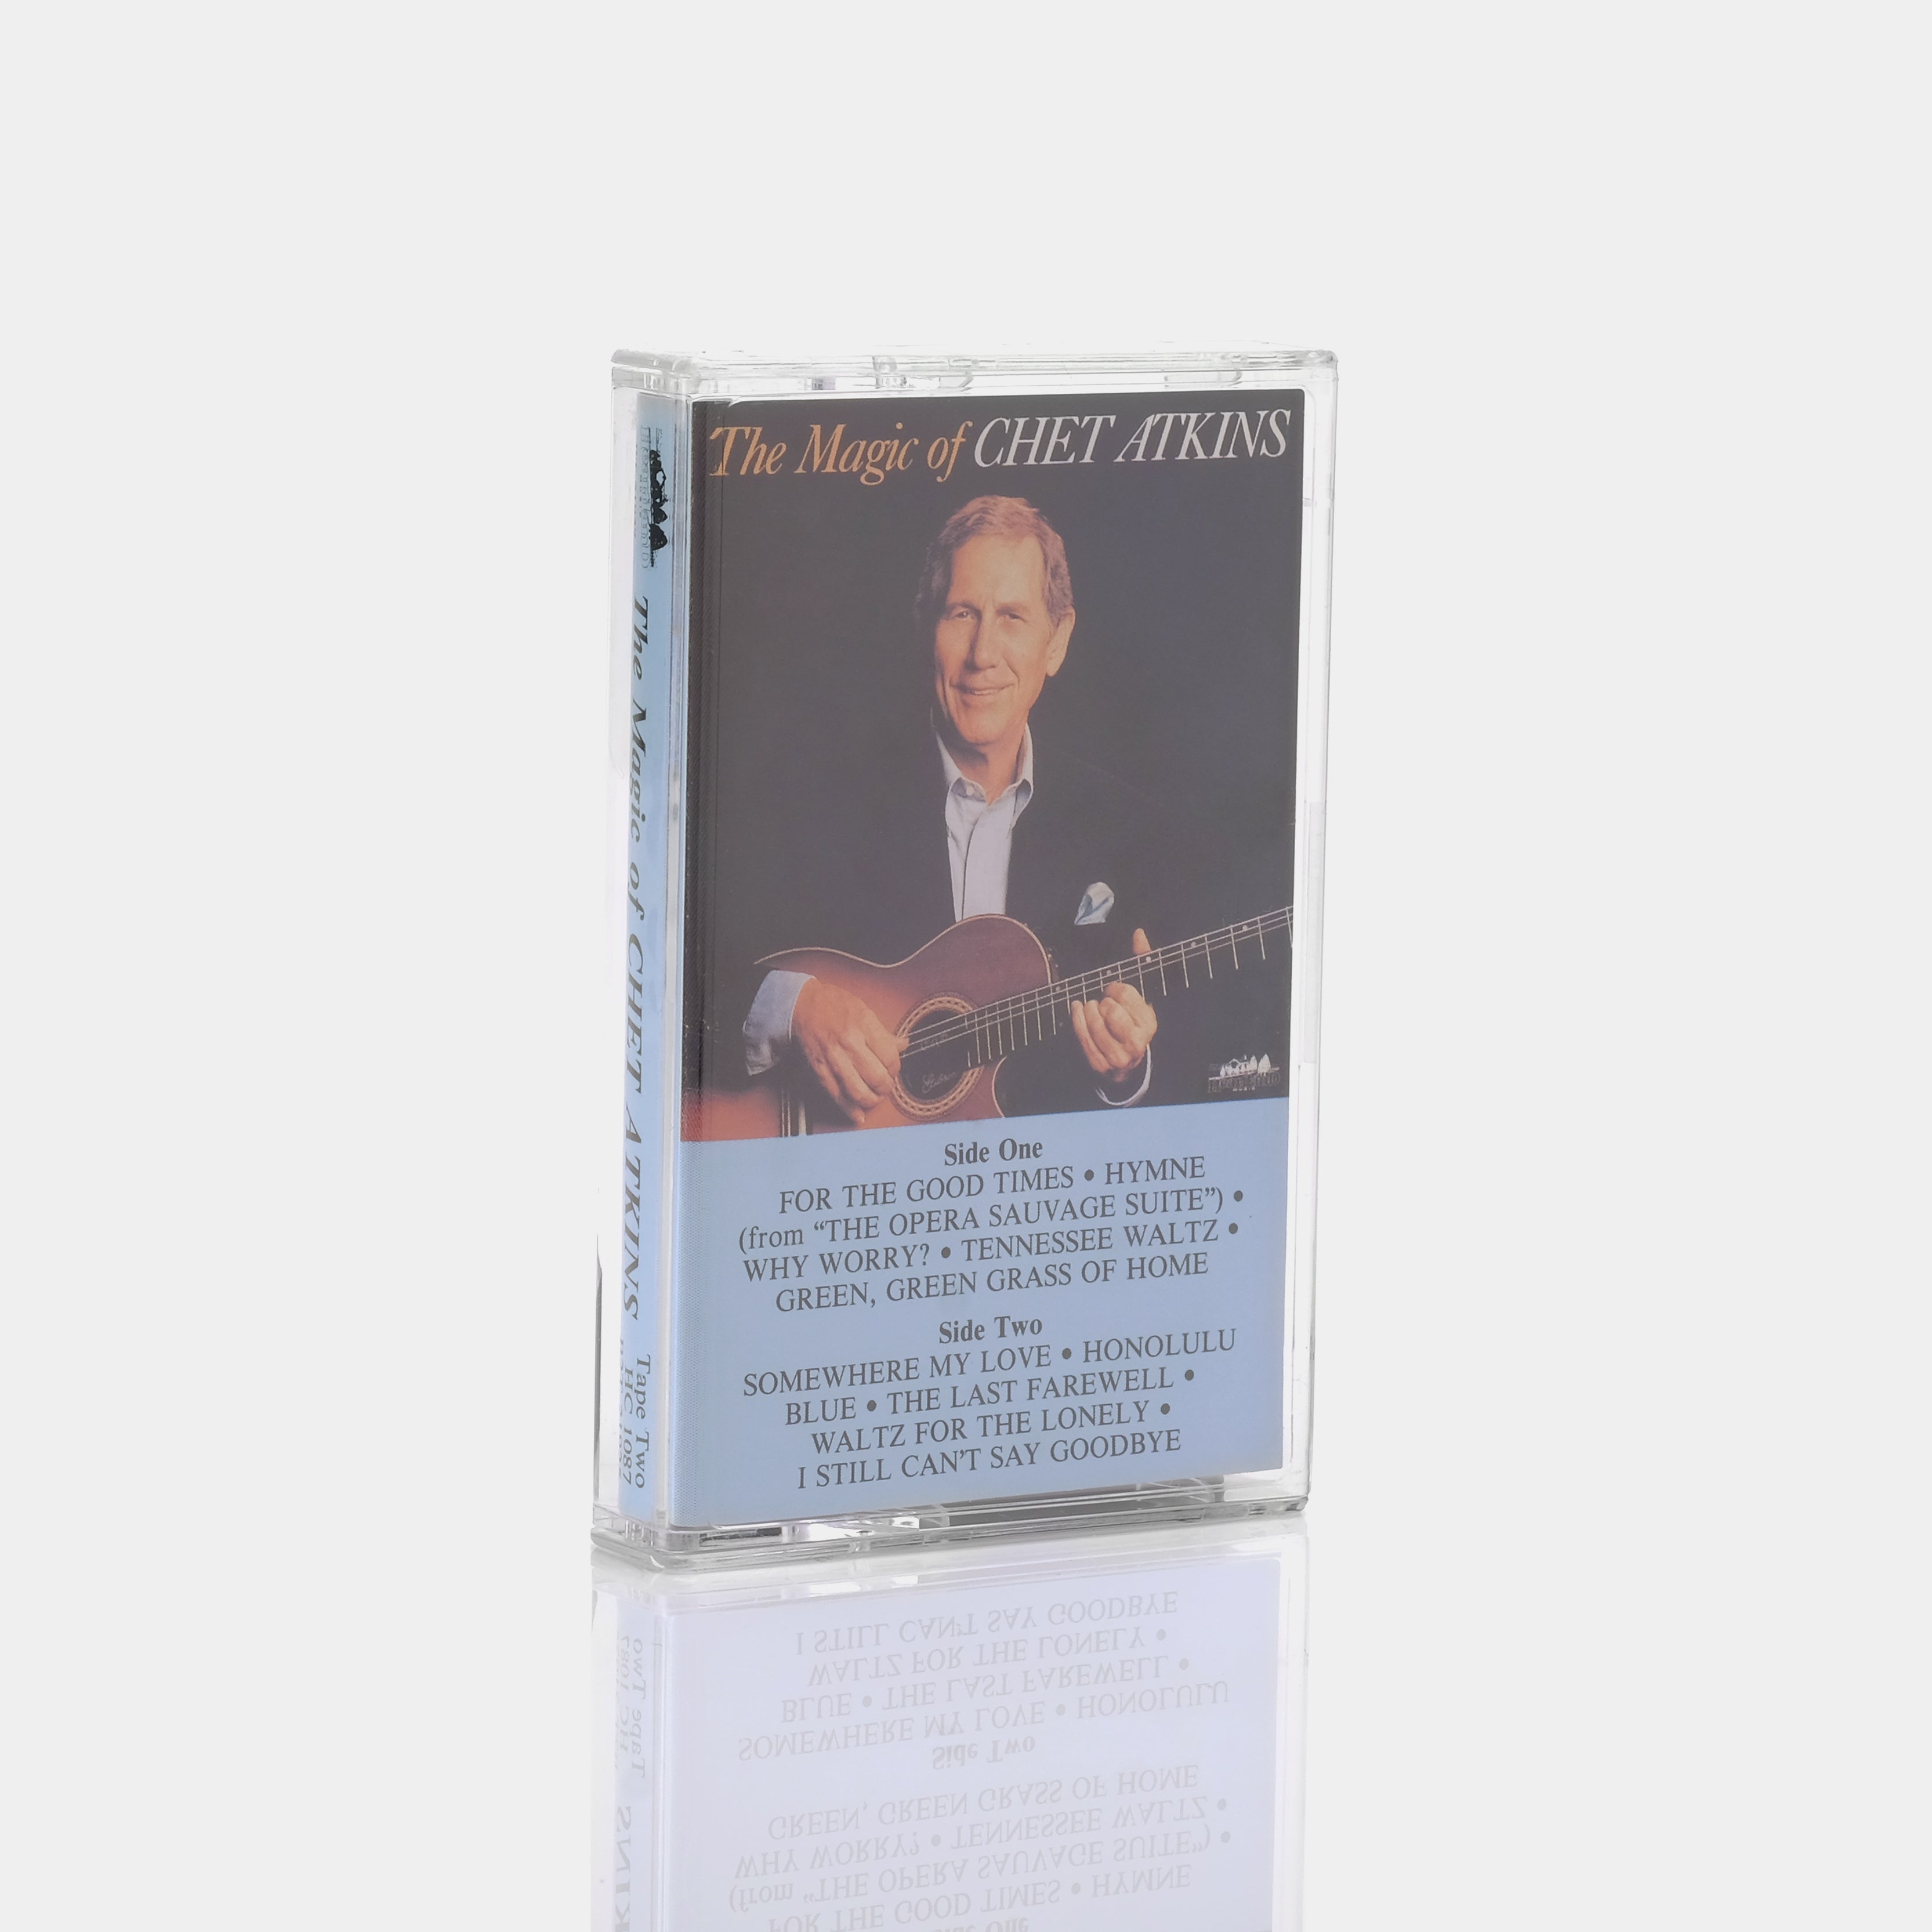 Chet Atkins - The Magic Of Chet Atkins (Tape Two) Cassette Tape